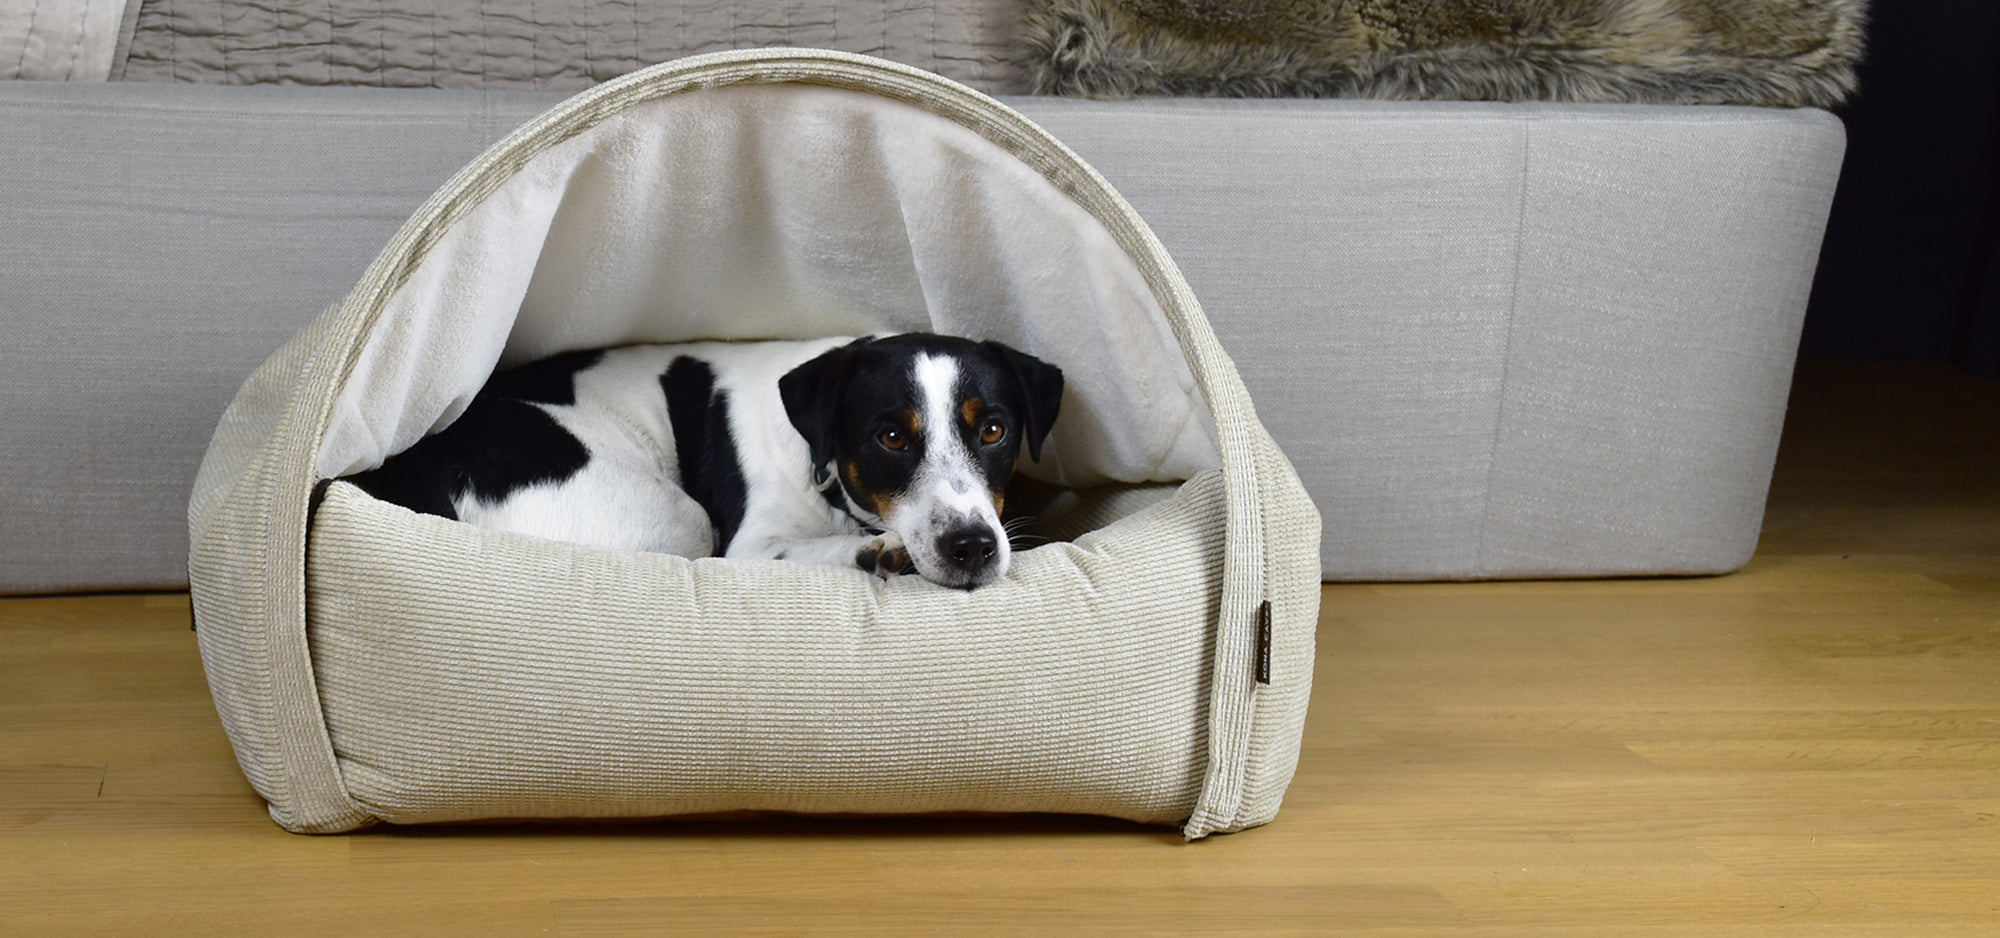 KONA CAVE® Luxury Cave Dog Bed in light tan color and corduroy fabric. Removable canopy cover, zips off. Jack Russell Terrier (black, white and tan) snuggled into the den bed. Dog in dog bed in front of a luxury Italia BnB Bed. 